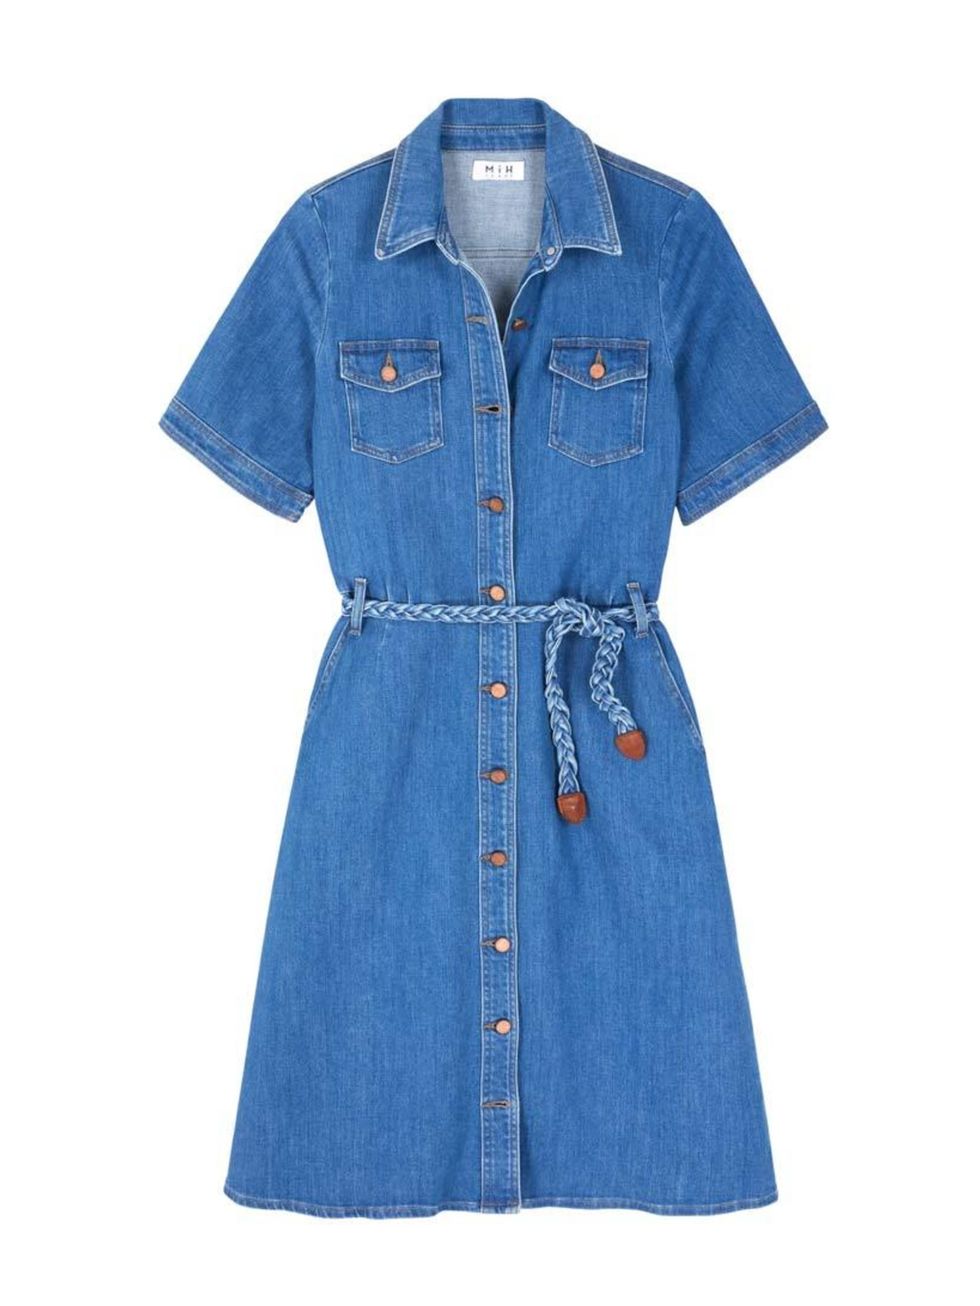 <p>Our dream summer dress. We'll layer it over a fine-knit rollneck while it's still chilly.</p>

<p><a href="http://www.mih-jeans.com/dresses-skirts/70s-denim-dress-dream-wash.html?___SID=U" target="_blank">MiH</a> dress, £295</p>